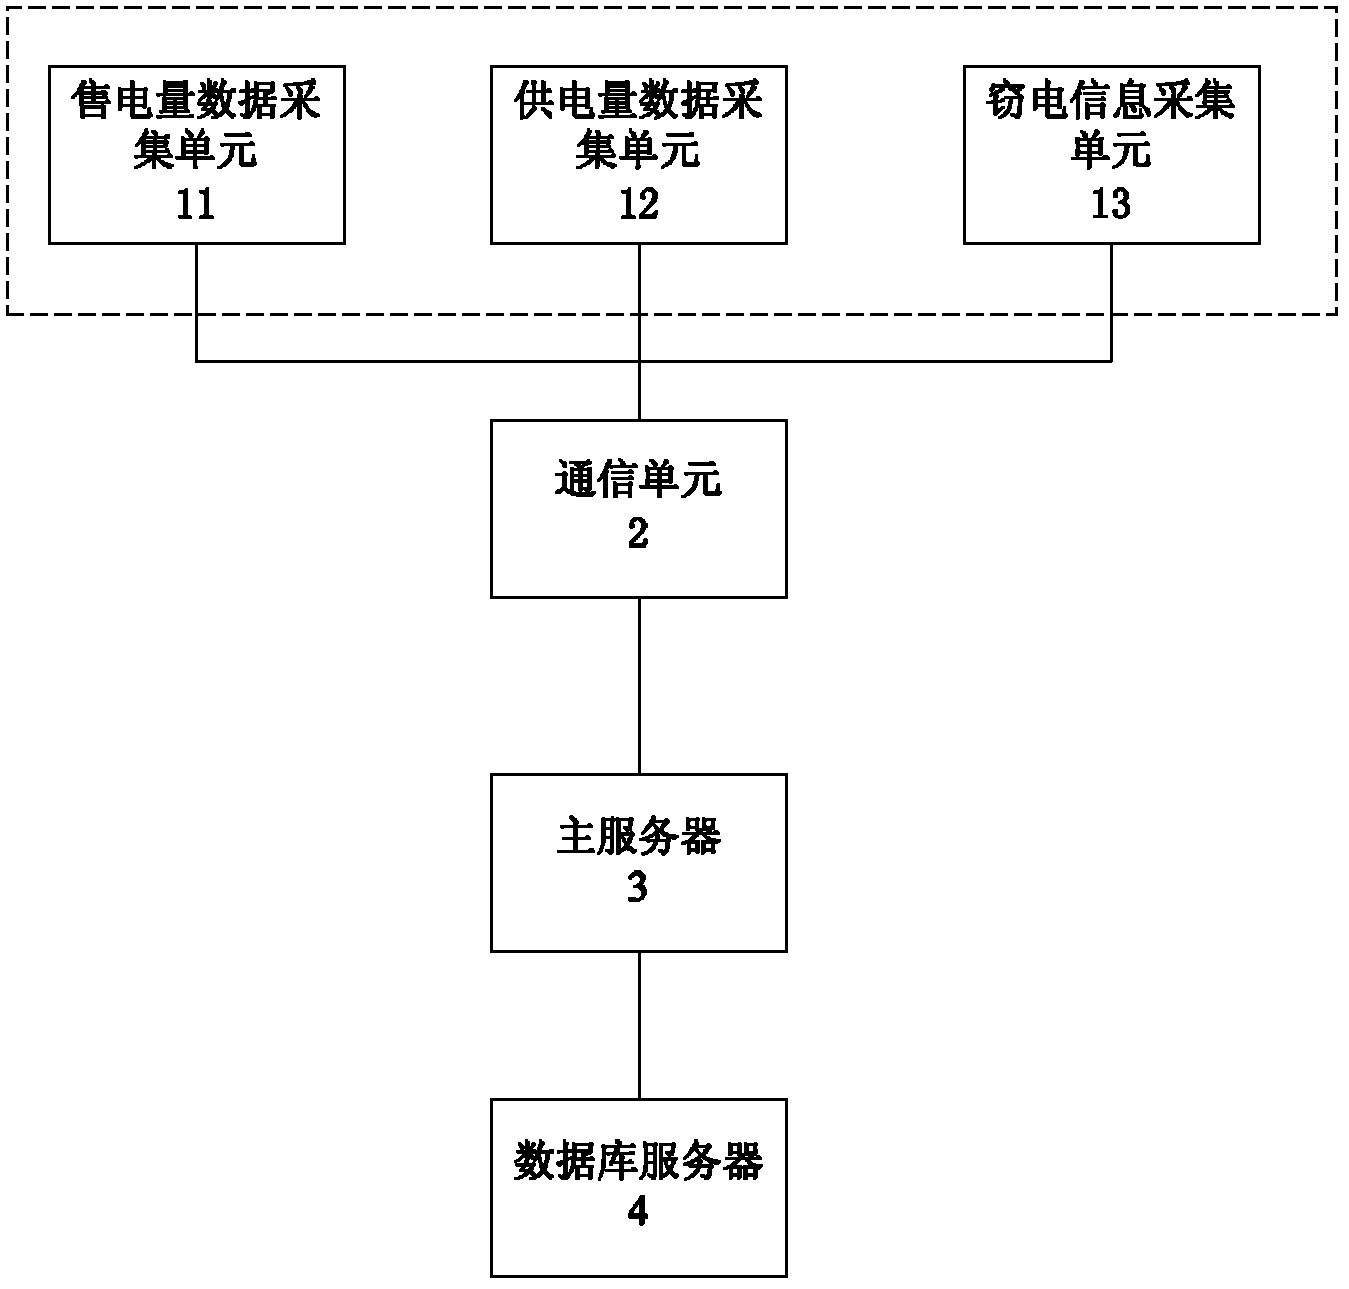 Computer auxiliary anti-electricity-stealing method and device based on typical electricity-stealing user database